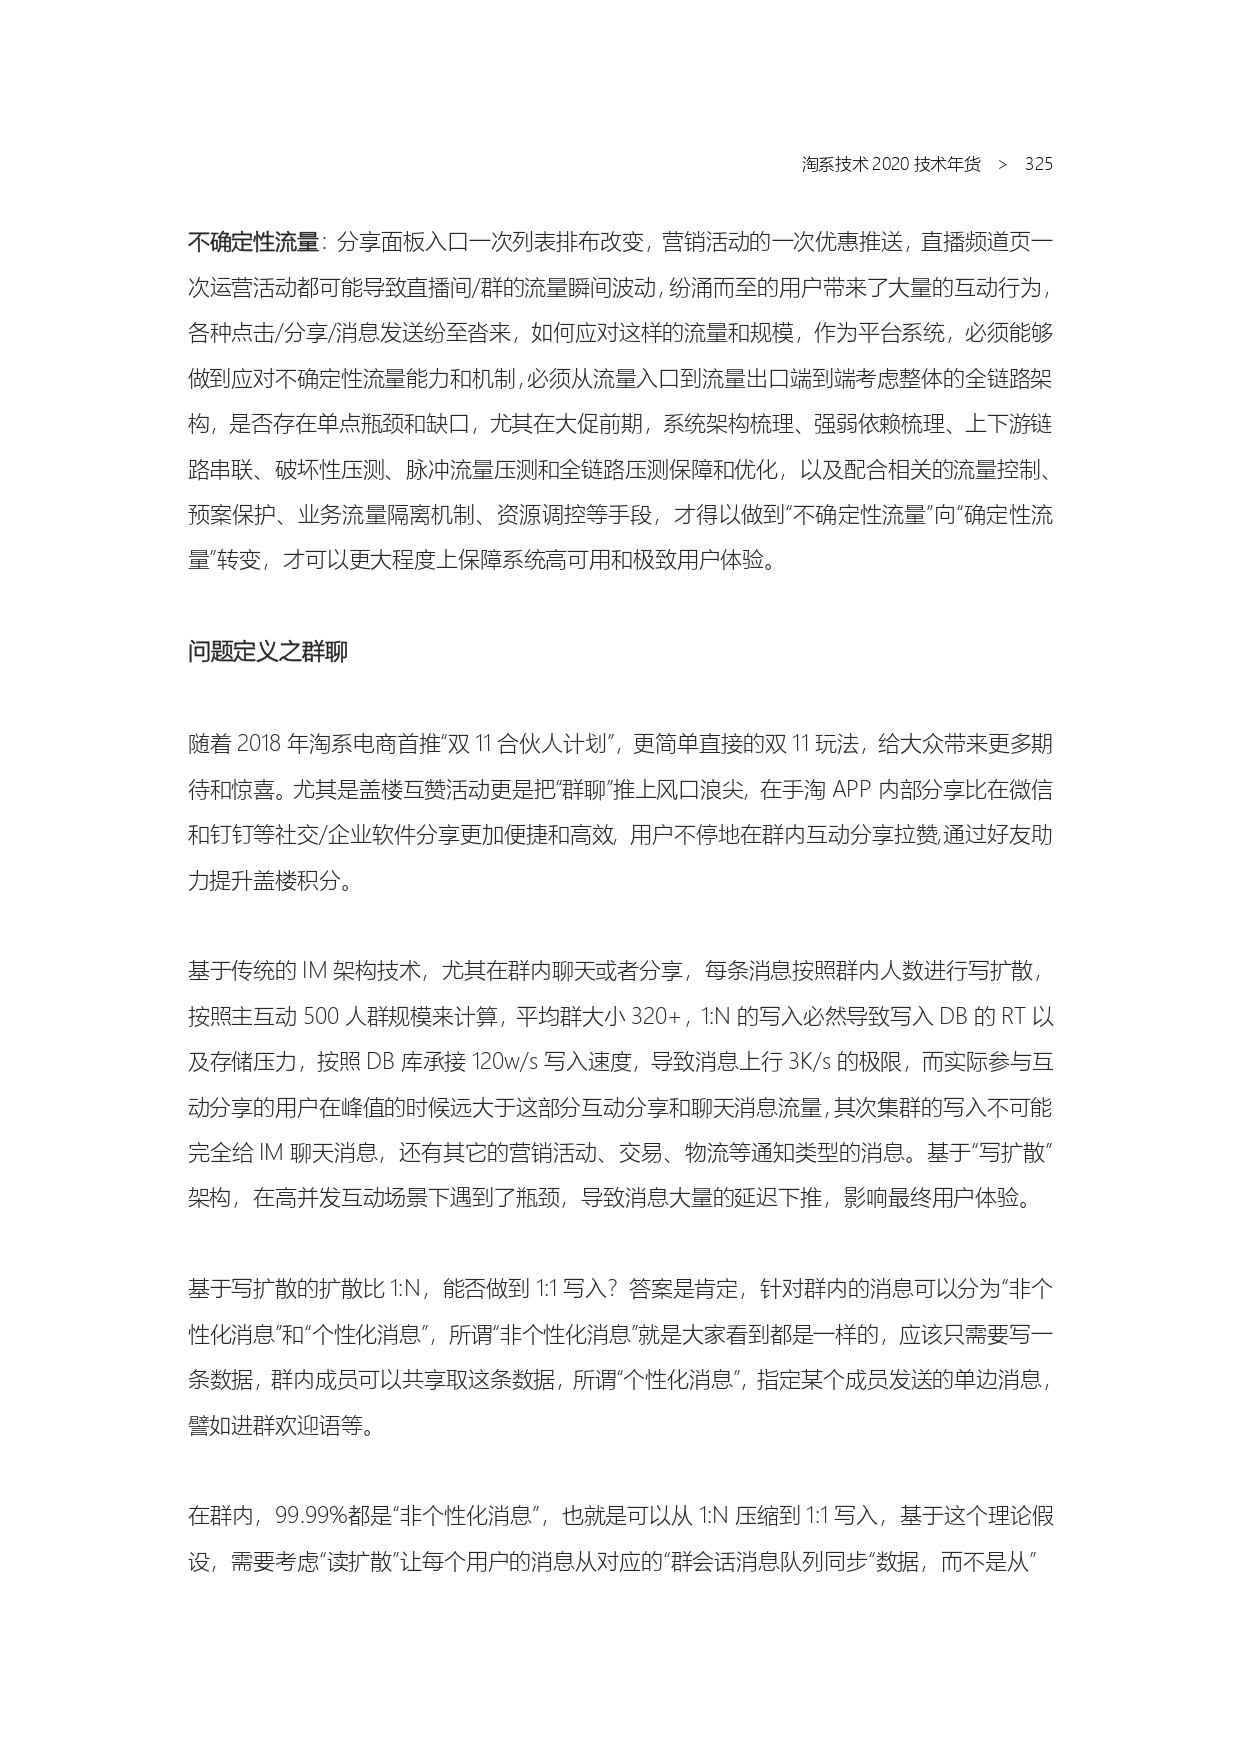 The Complete Works of Tao Technology 2020-1-570_page-0325.jpg